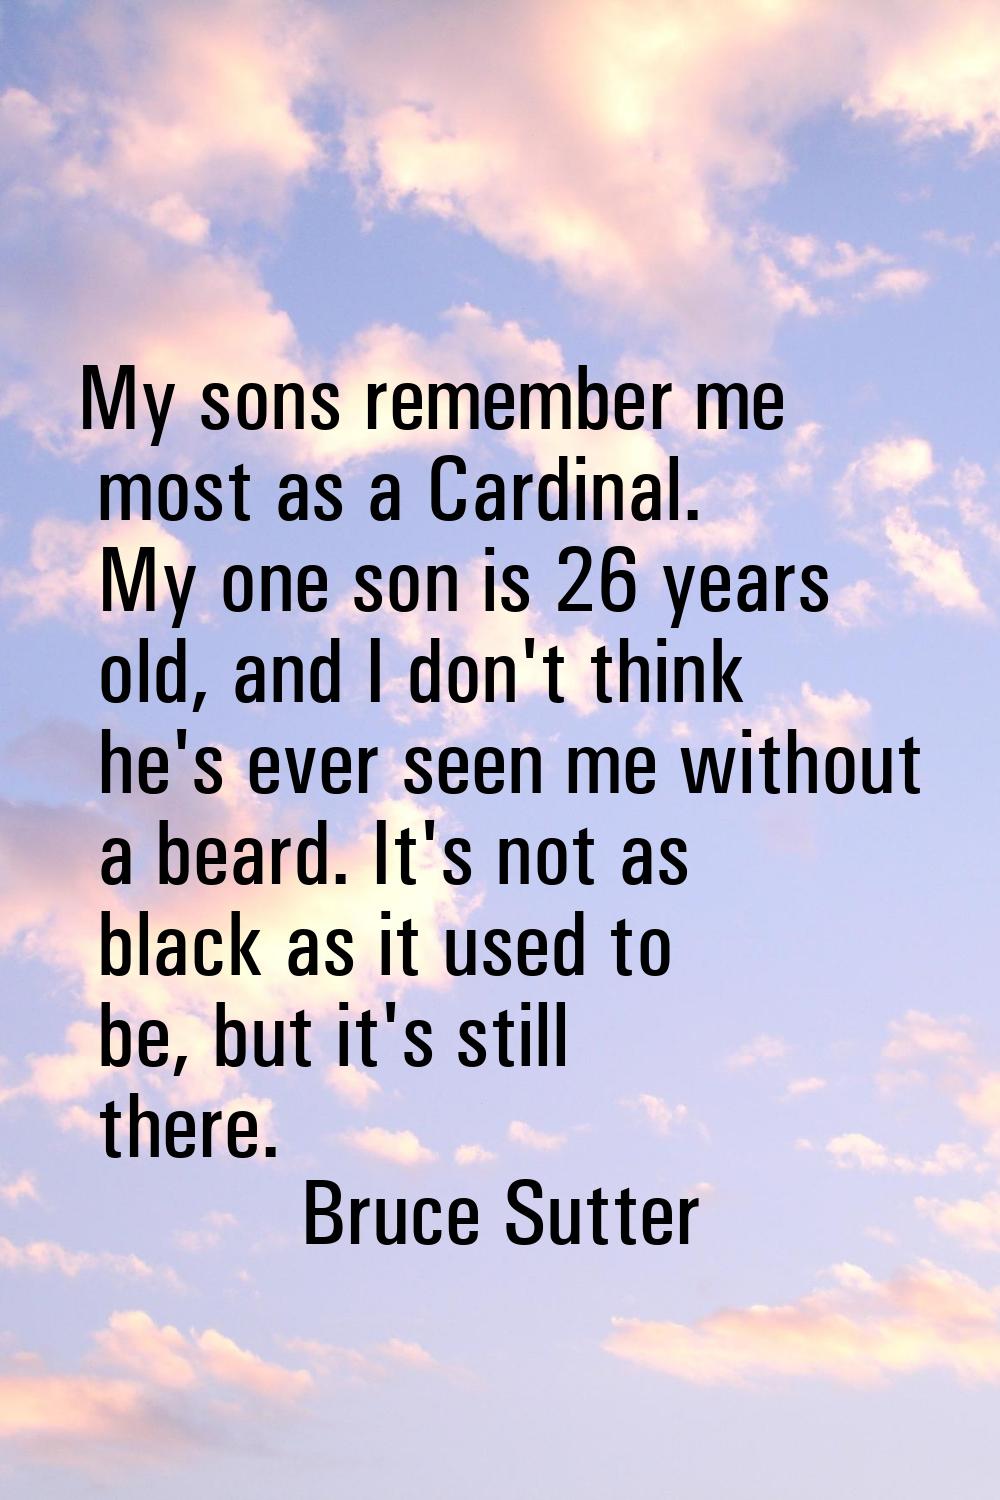 My sons remember me most as a Cardinal. My one son is 26 years old, and I don't think he's ever see